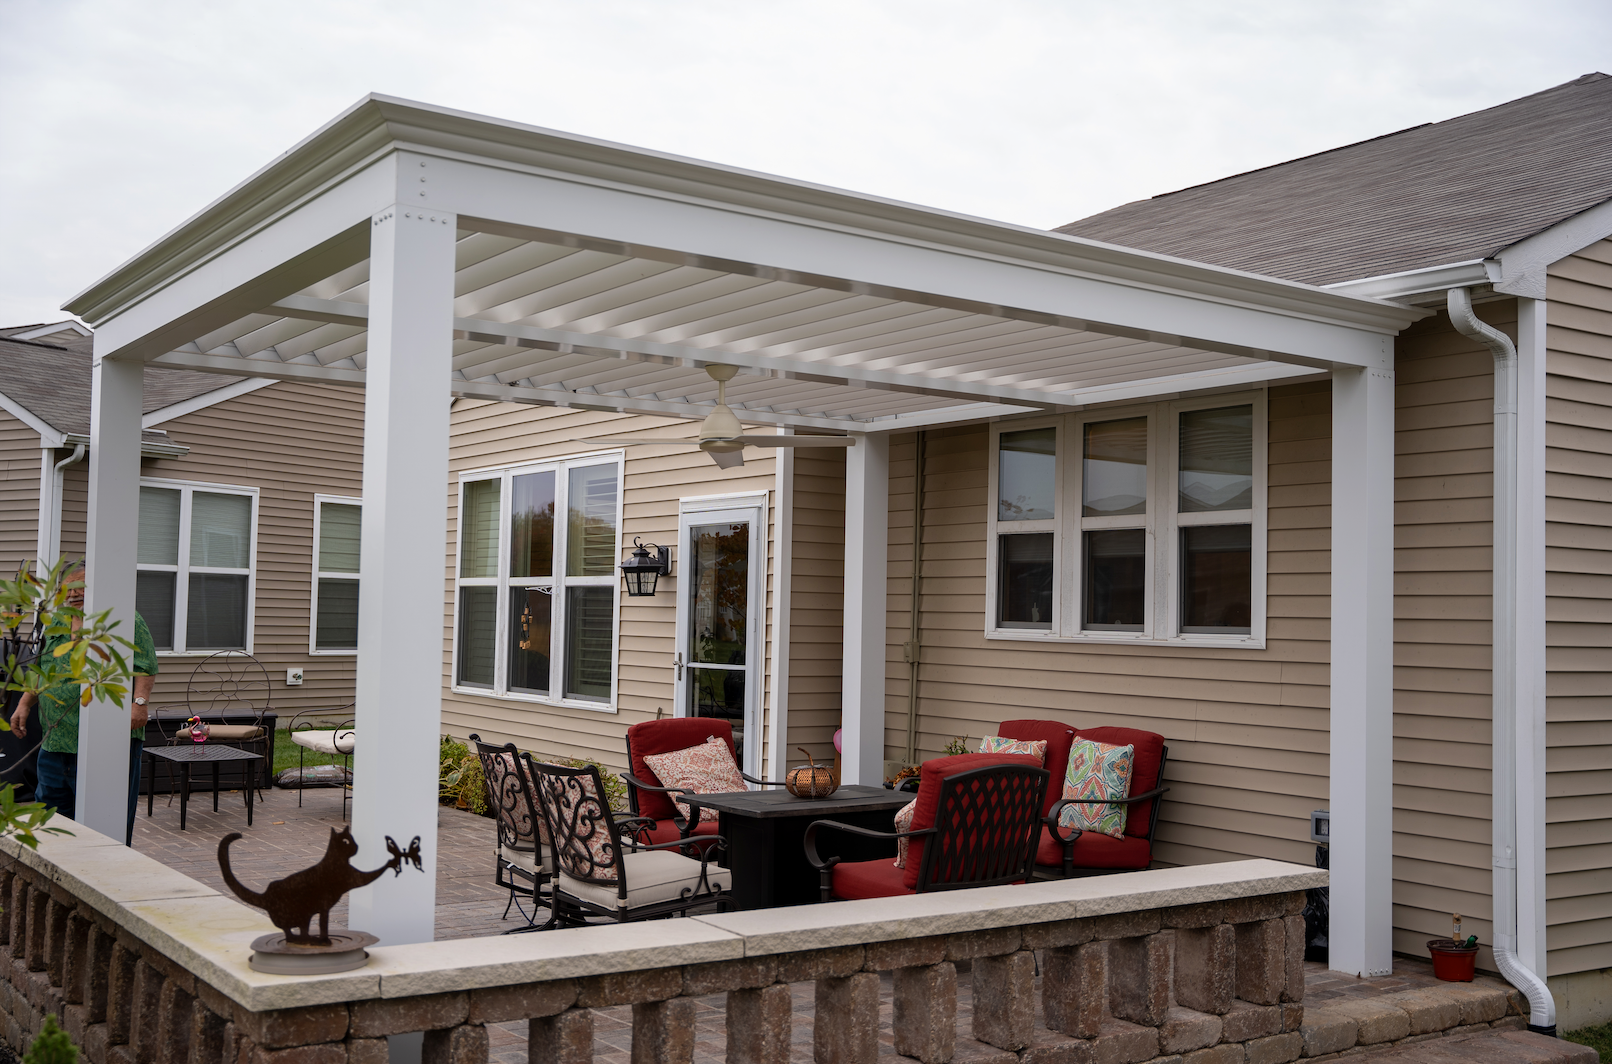 great patio or decks ideas outside of house. showing seating, dining and chairs seating area use of space.